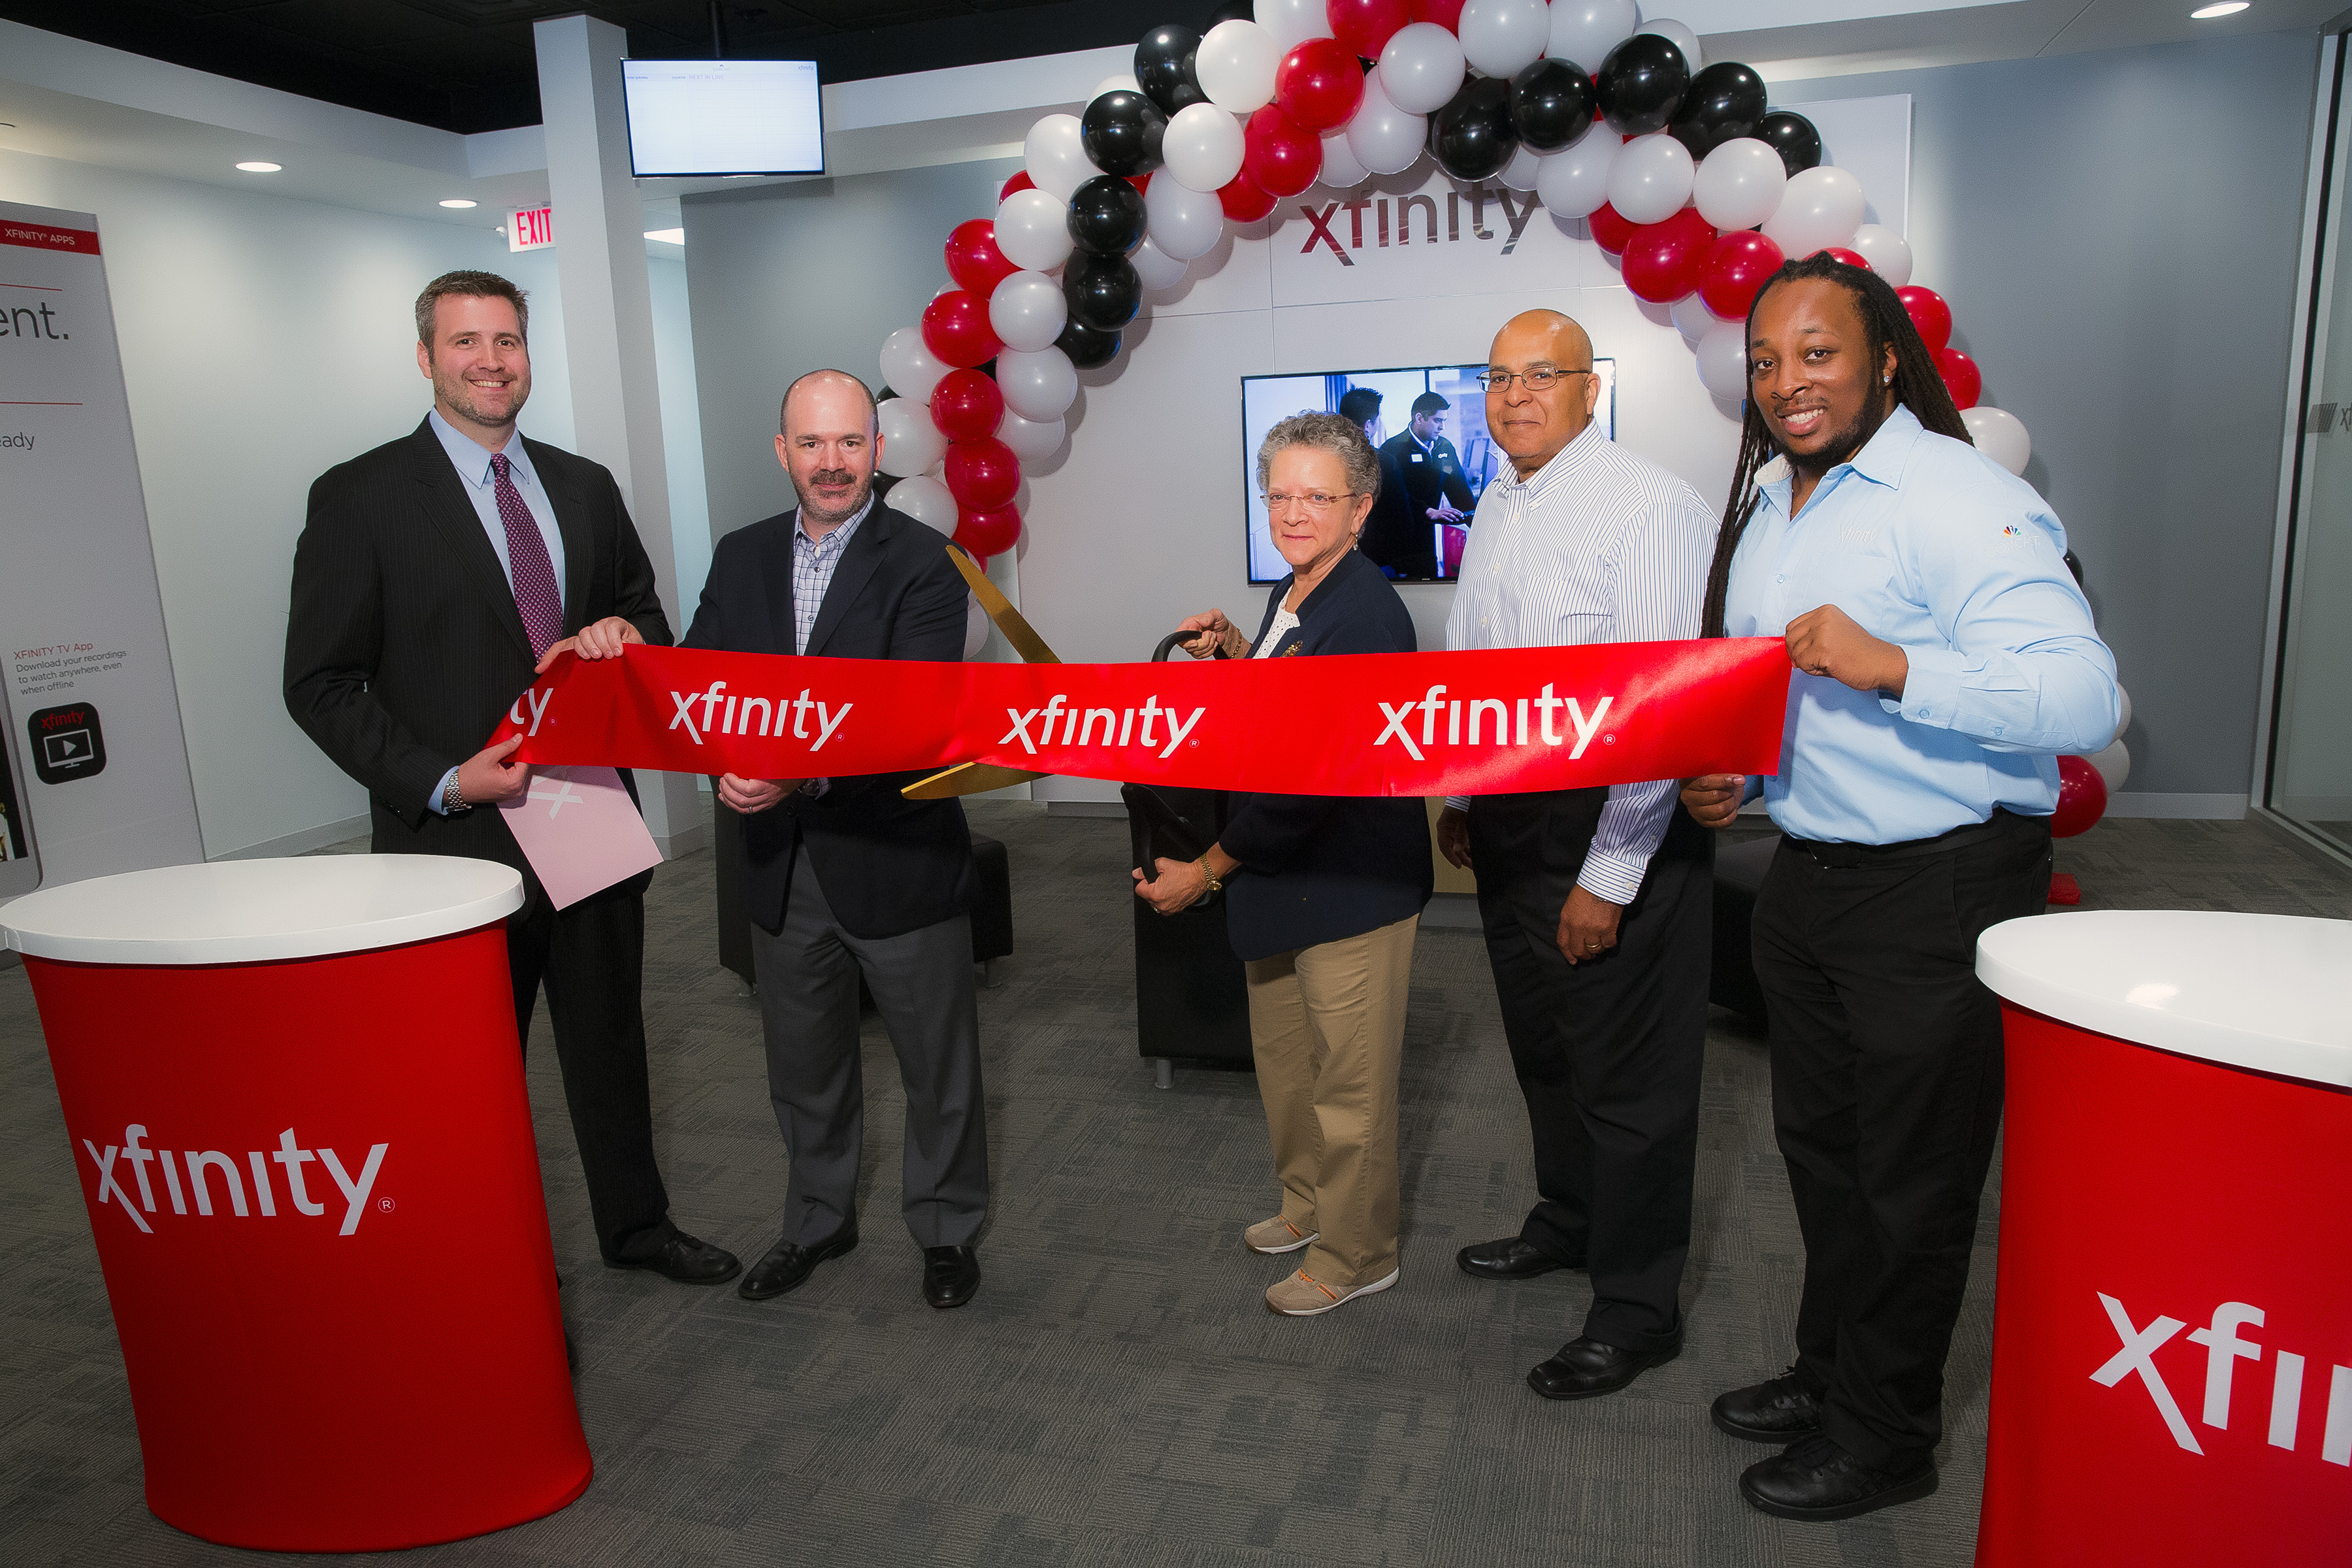 Comcast Market Manager Brian Paciorek, Comcast Director of Retail Sales & Marketing Mark Dionne, New Jersey Assemblywoman Mila Jasey, Comcast Senior Director of Government Affairs Charles Smith, Comcast West Orange Xfinity Store Manager Jason Gathright